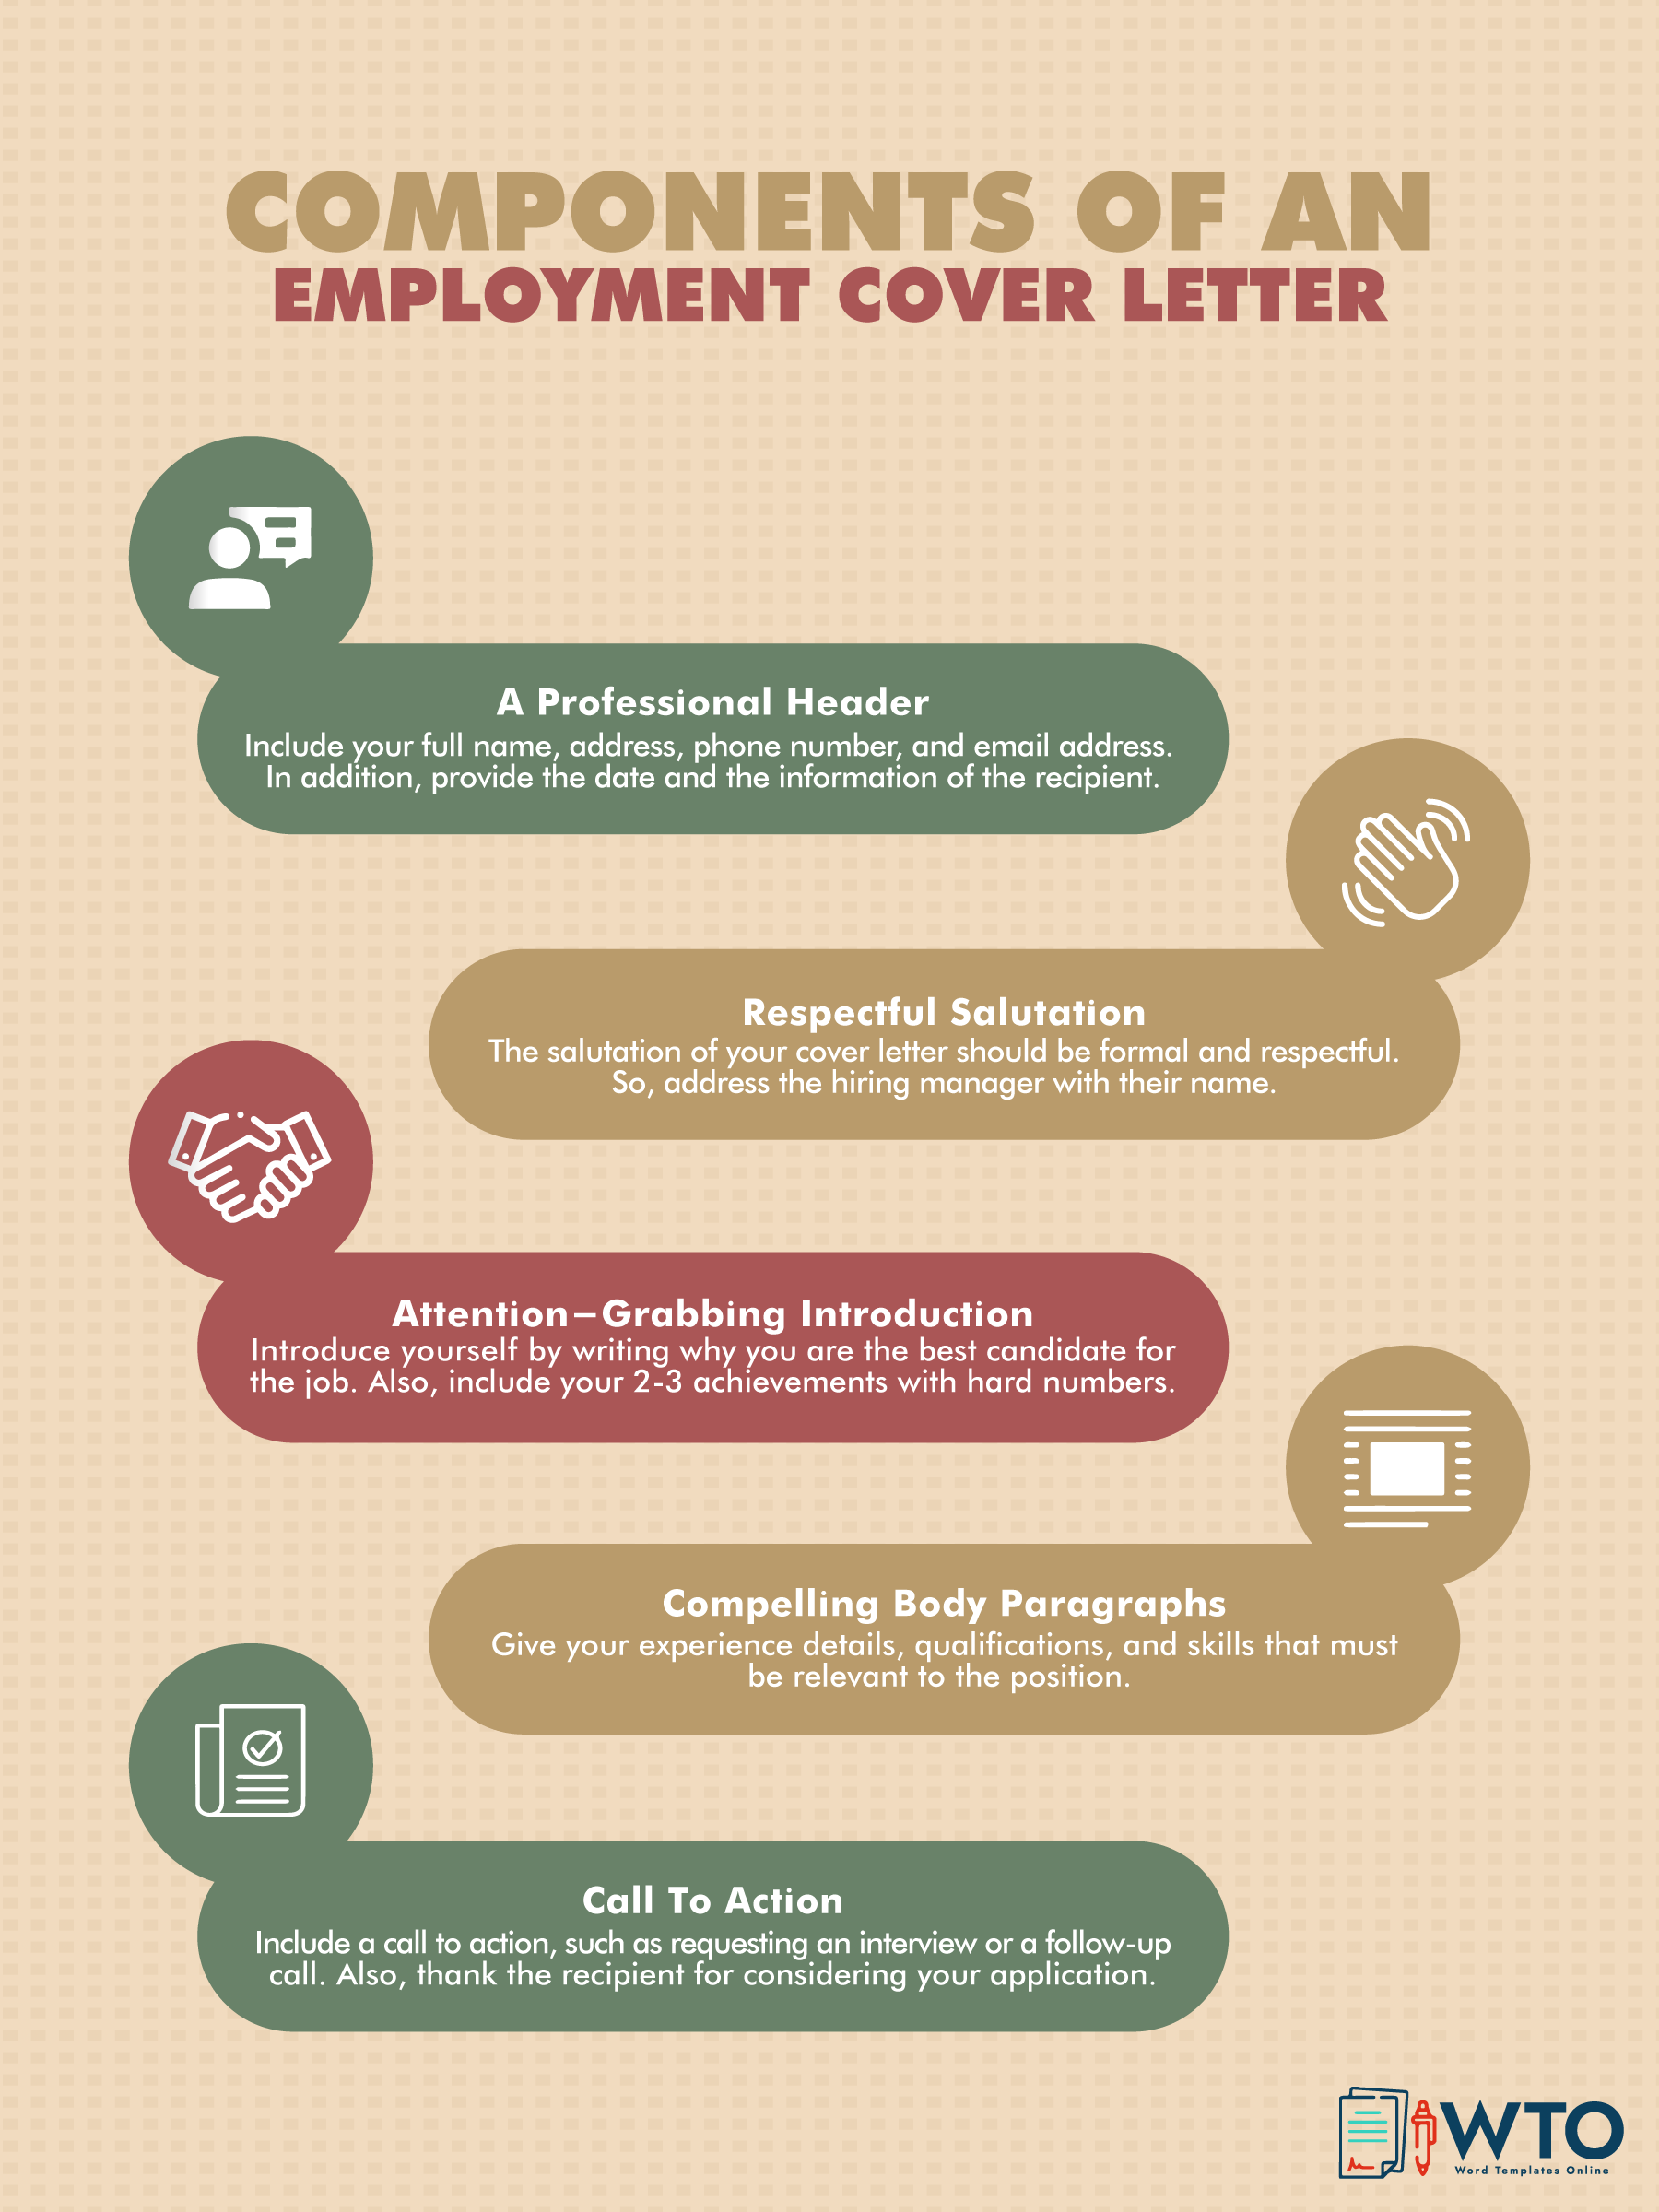 This infographic includes the components of an employment cover letter.